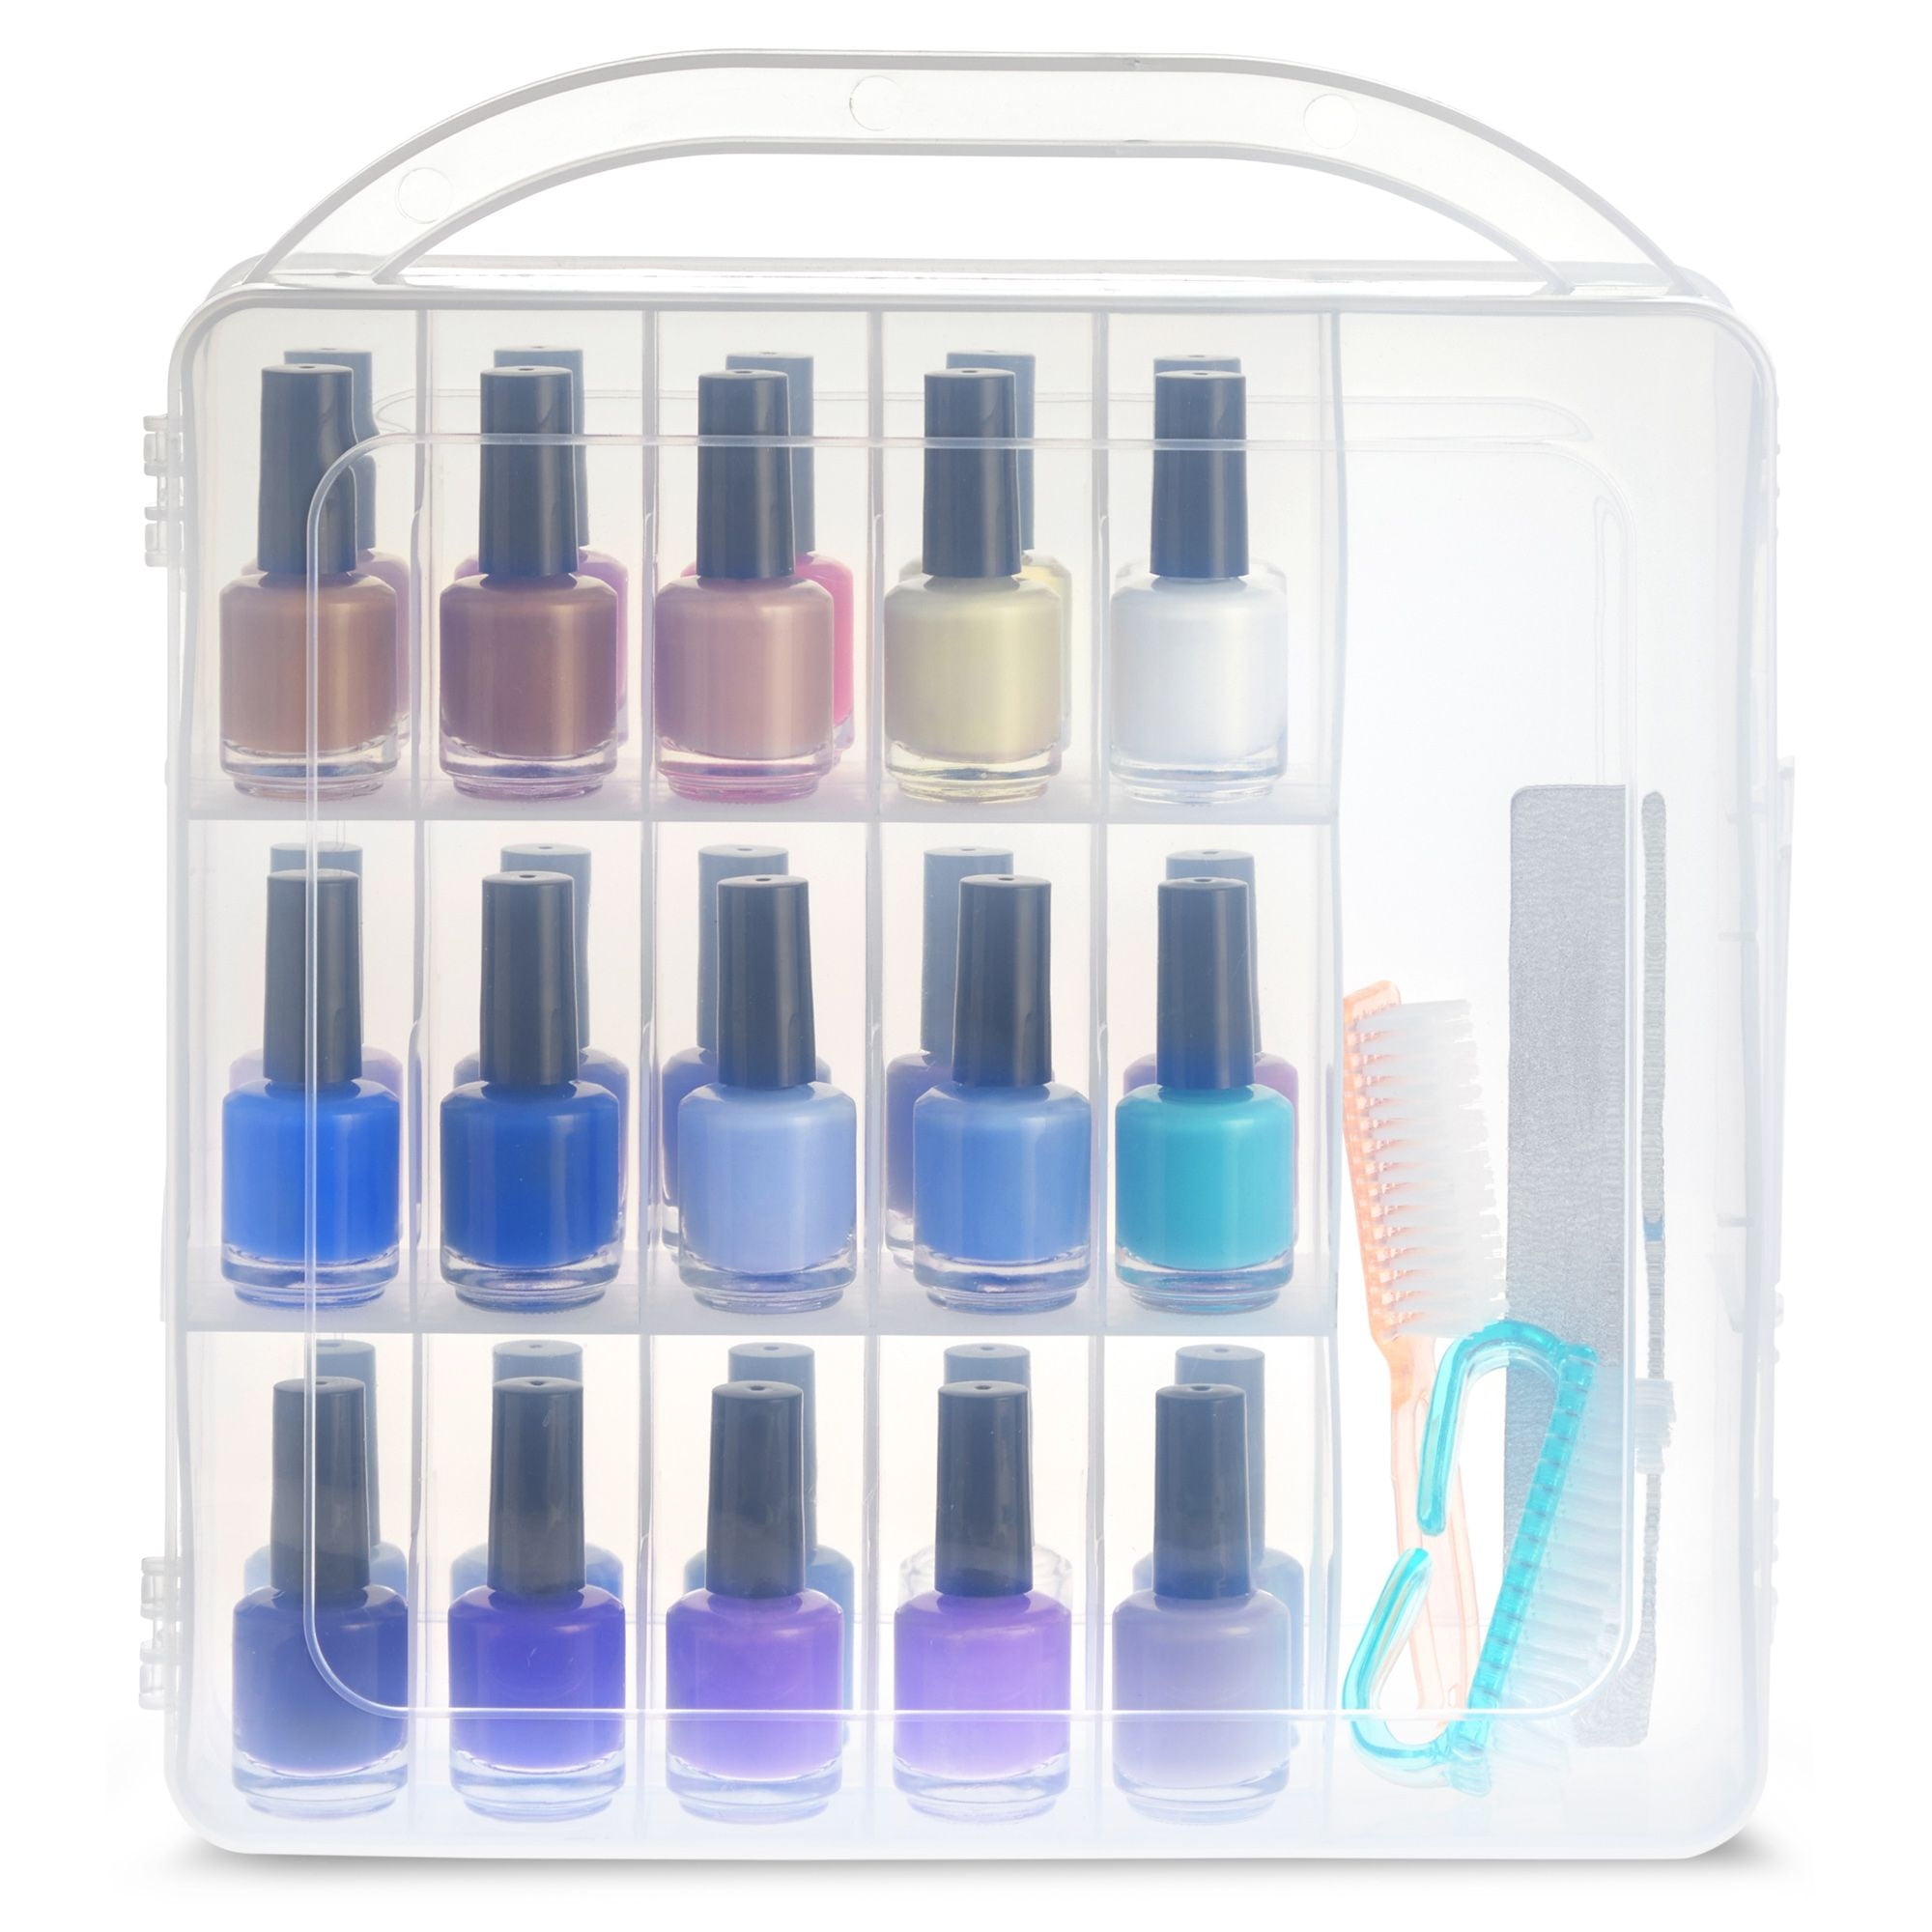 EVERGD Nail Polish Organizer Case - 48 Compartments for Cosmetics